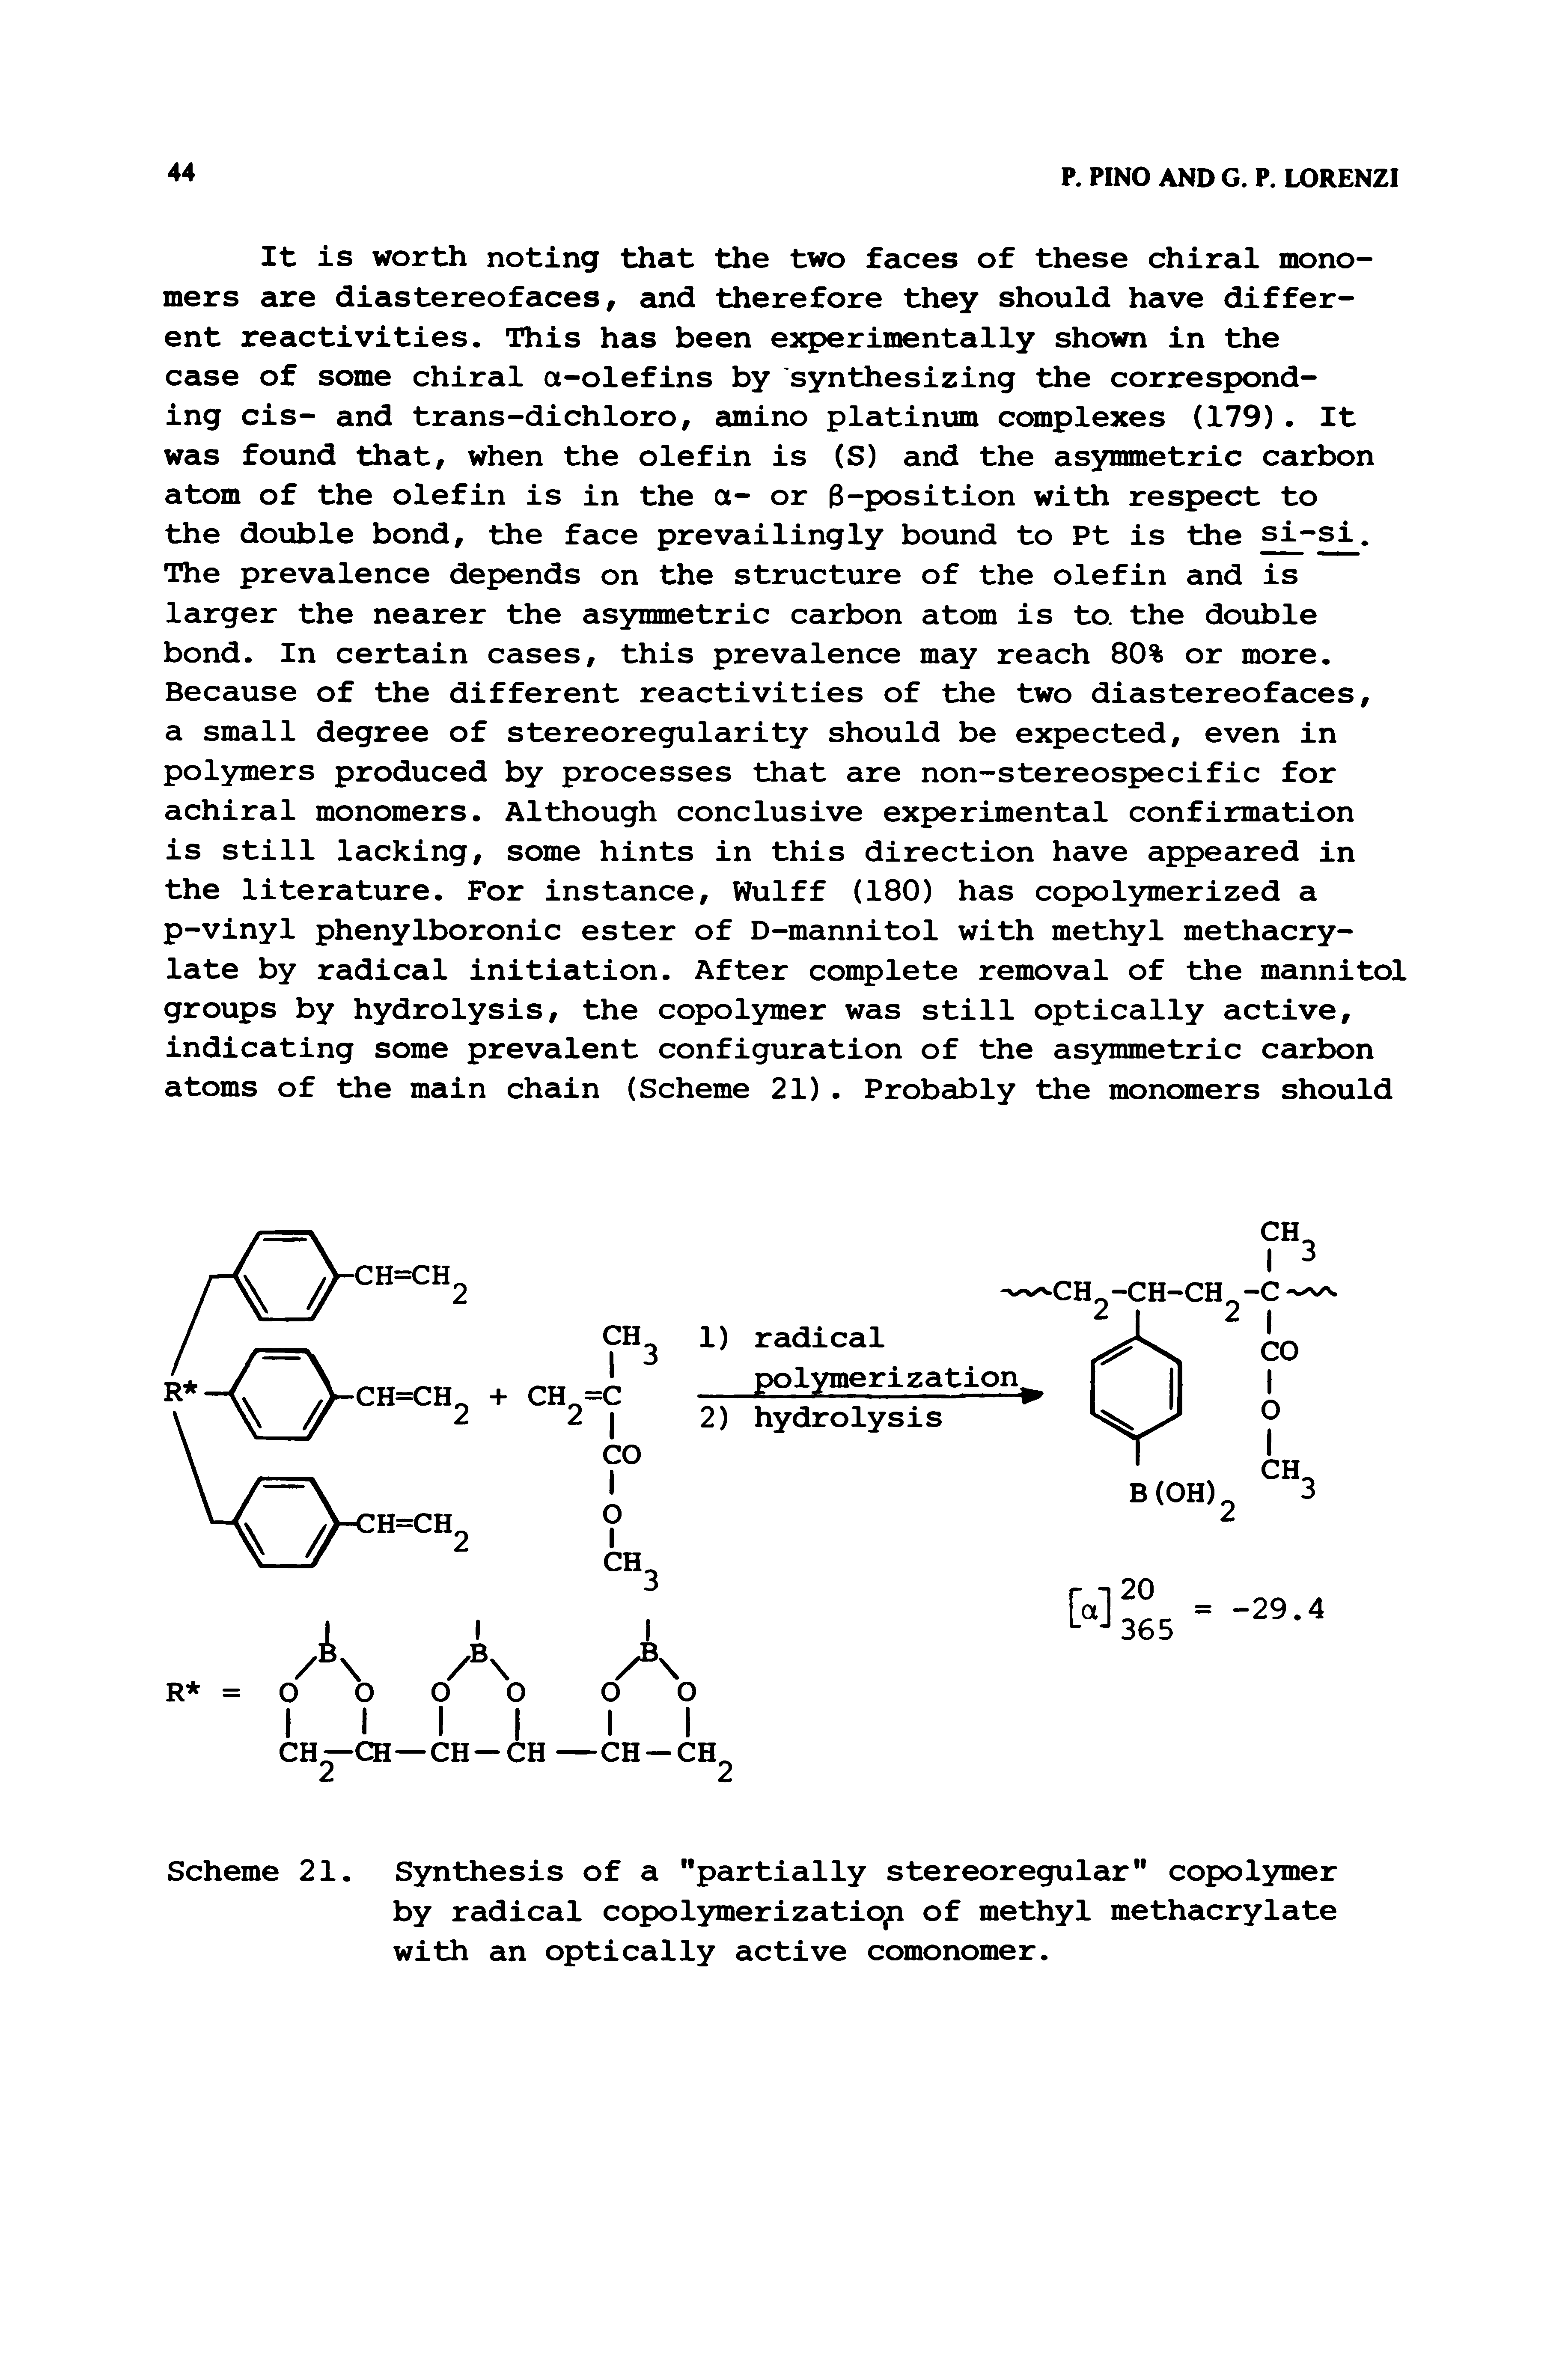 Scheme 21. Synthesis of a "partially stereoregular copolymer by radical copolymerizatio n of methyl methacrylate with an optically active comonomer.